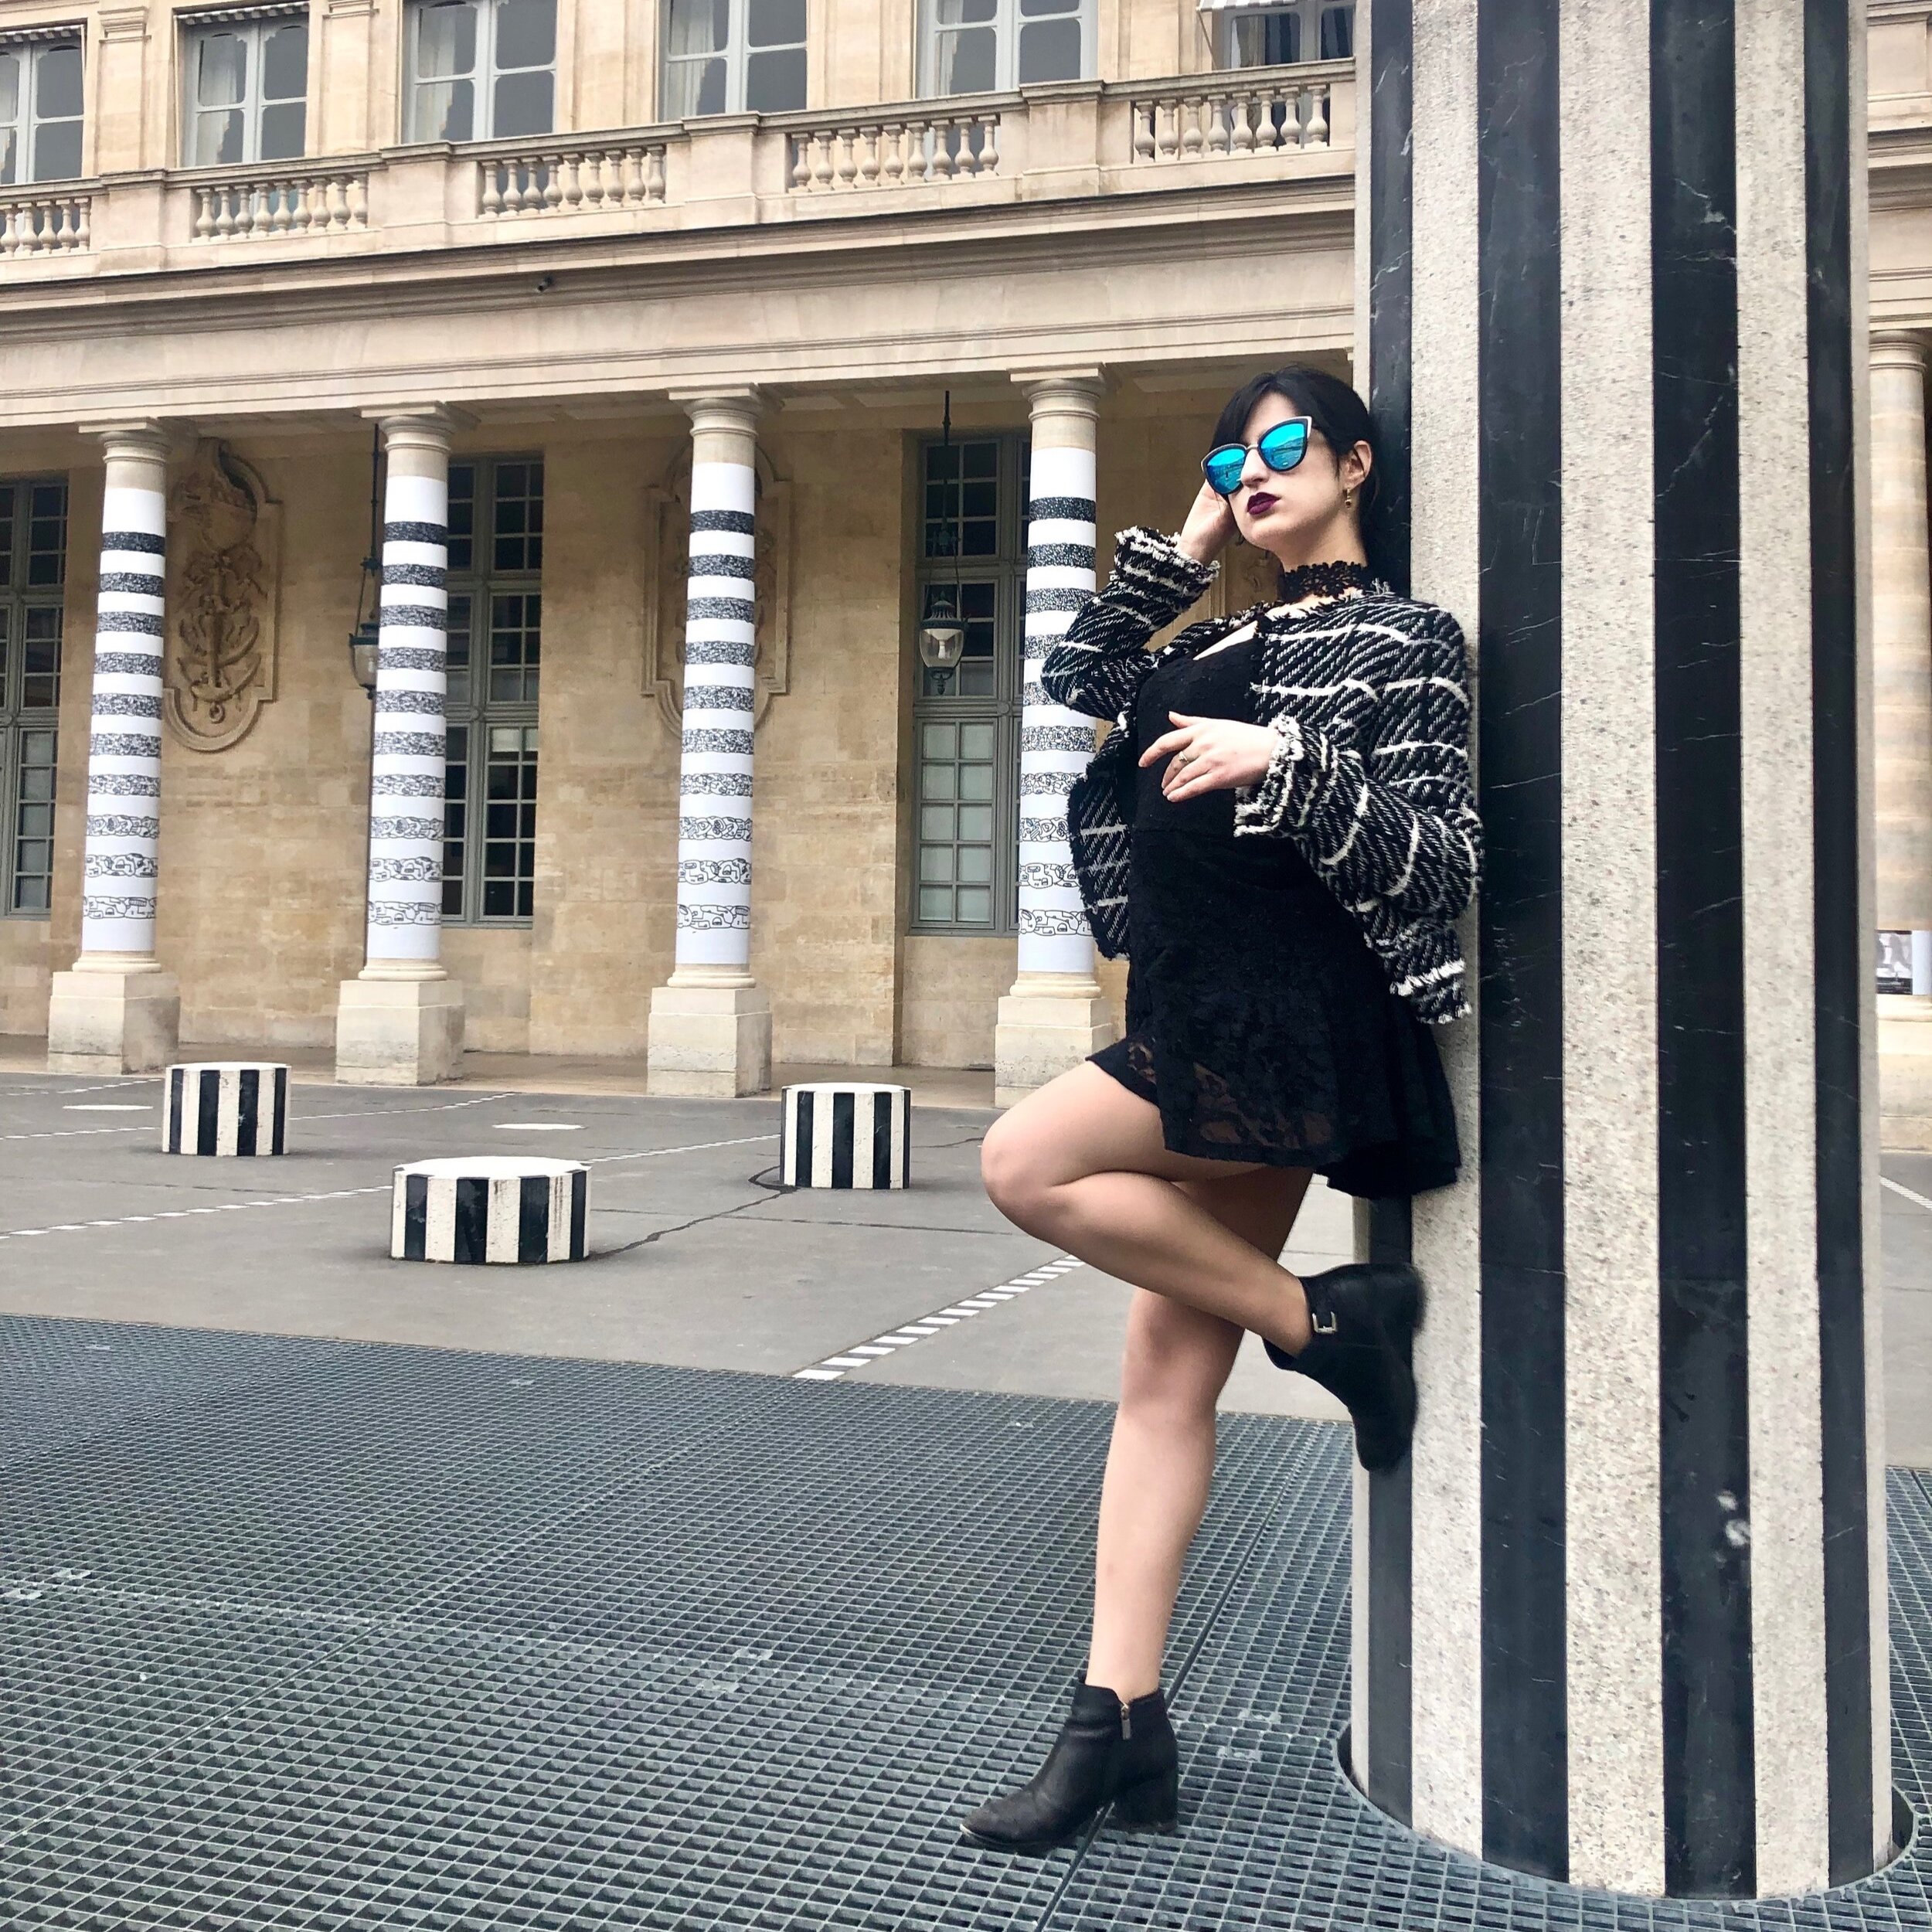 Affordable French Clothing Brands – Shopping in Paris - Midlife Globetrotter